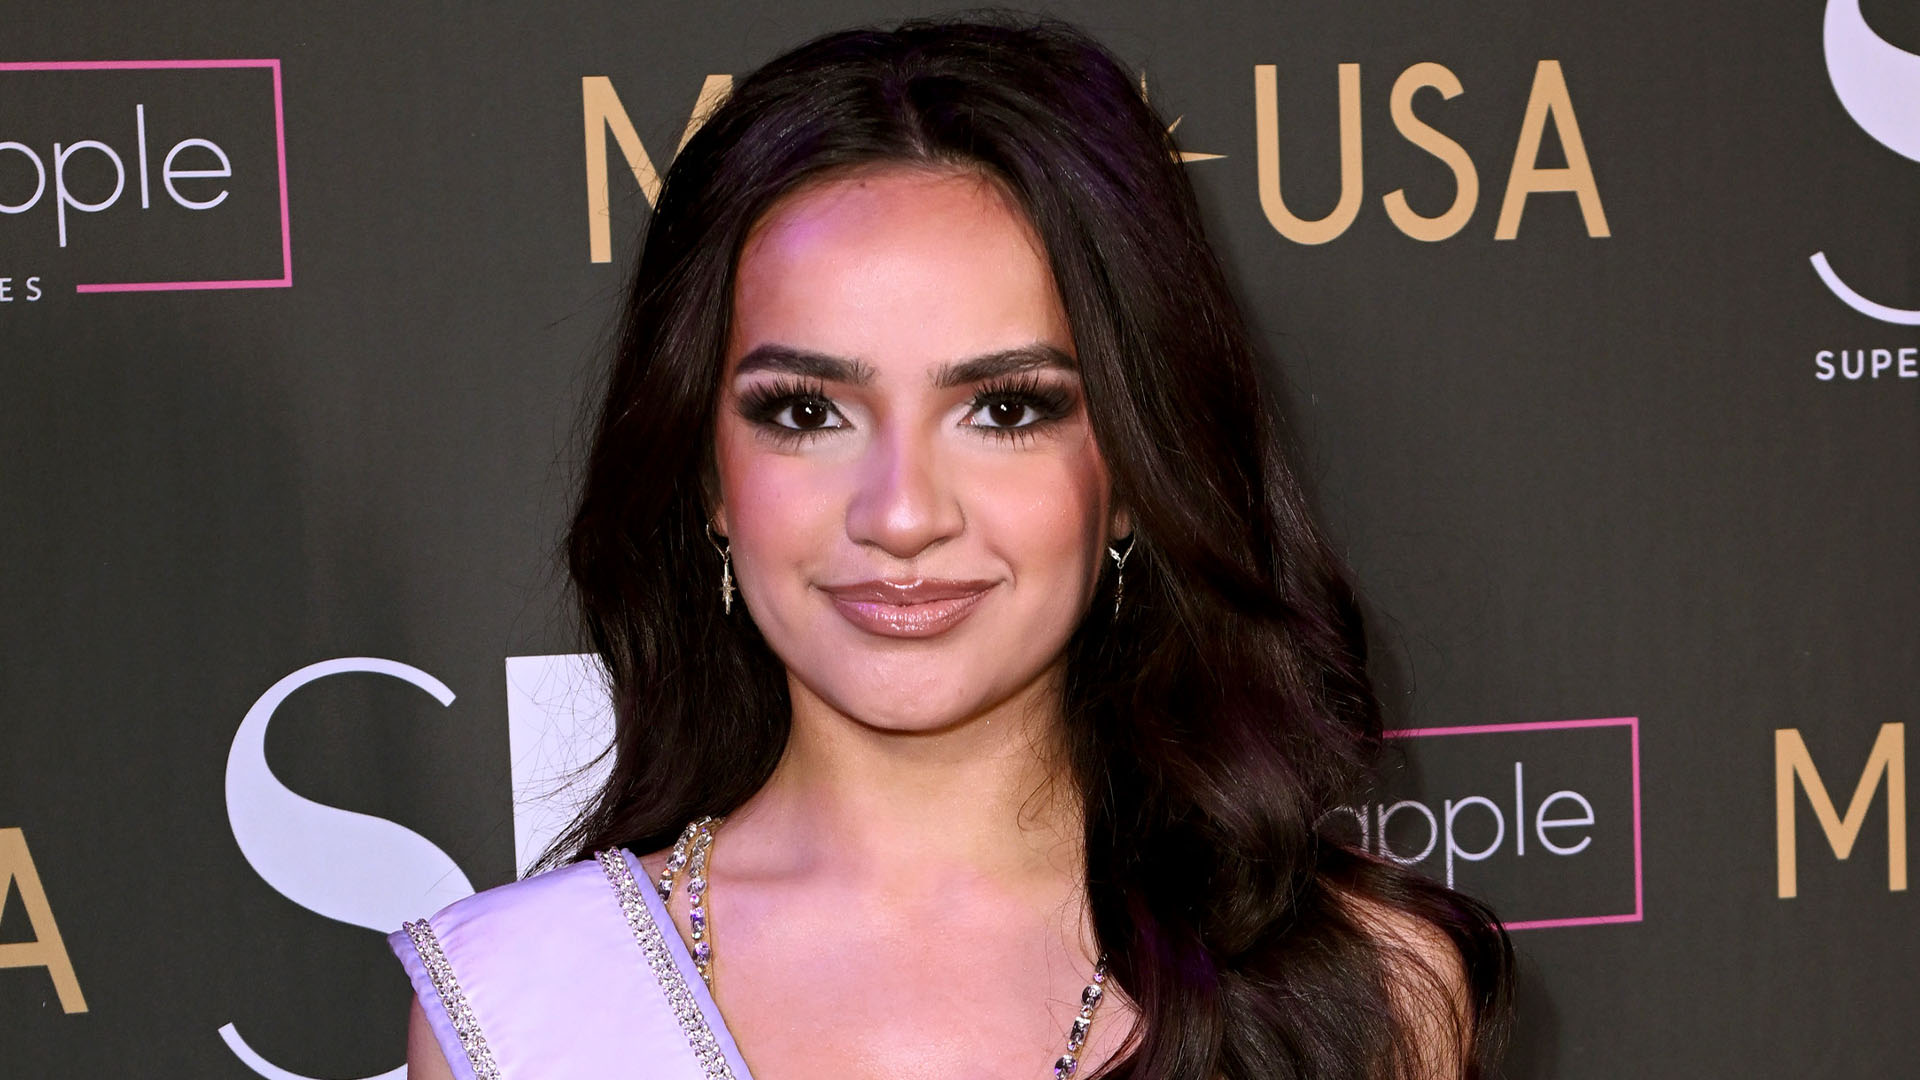 Miss Teen USA UmaSofia Srivastava steps down just days after Miss USA as ‘values no longer align’ with organization [Video]